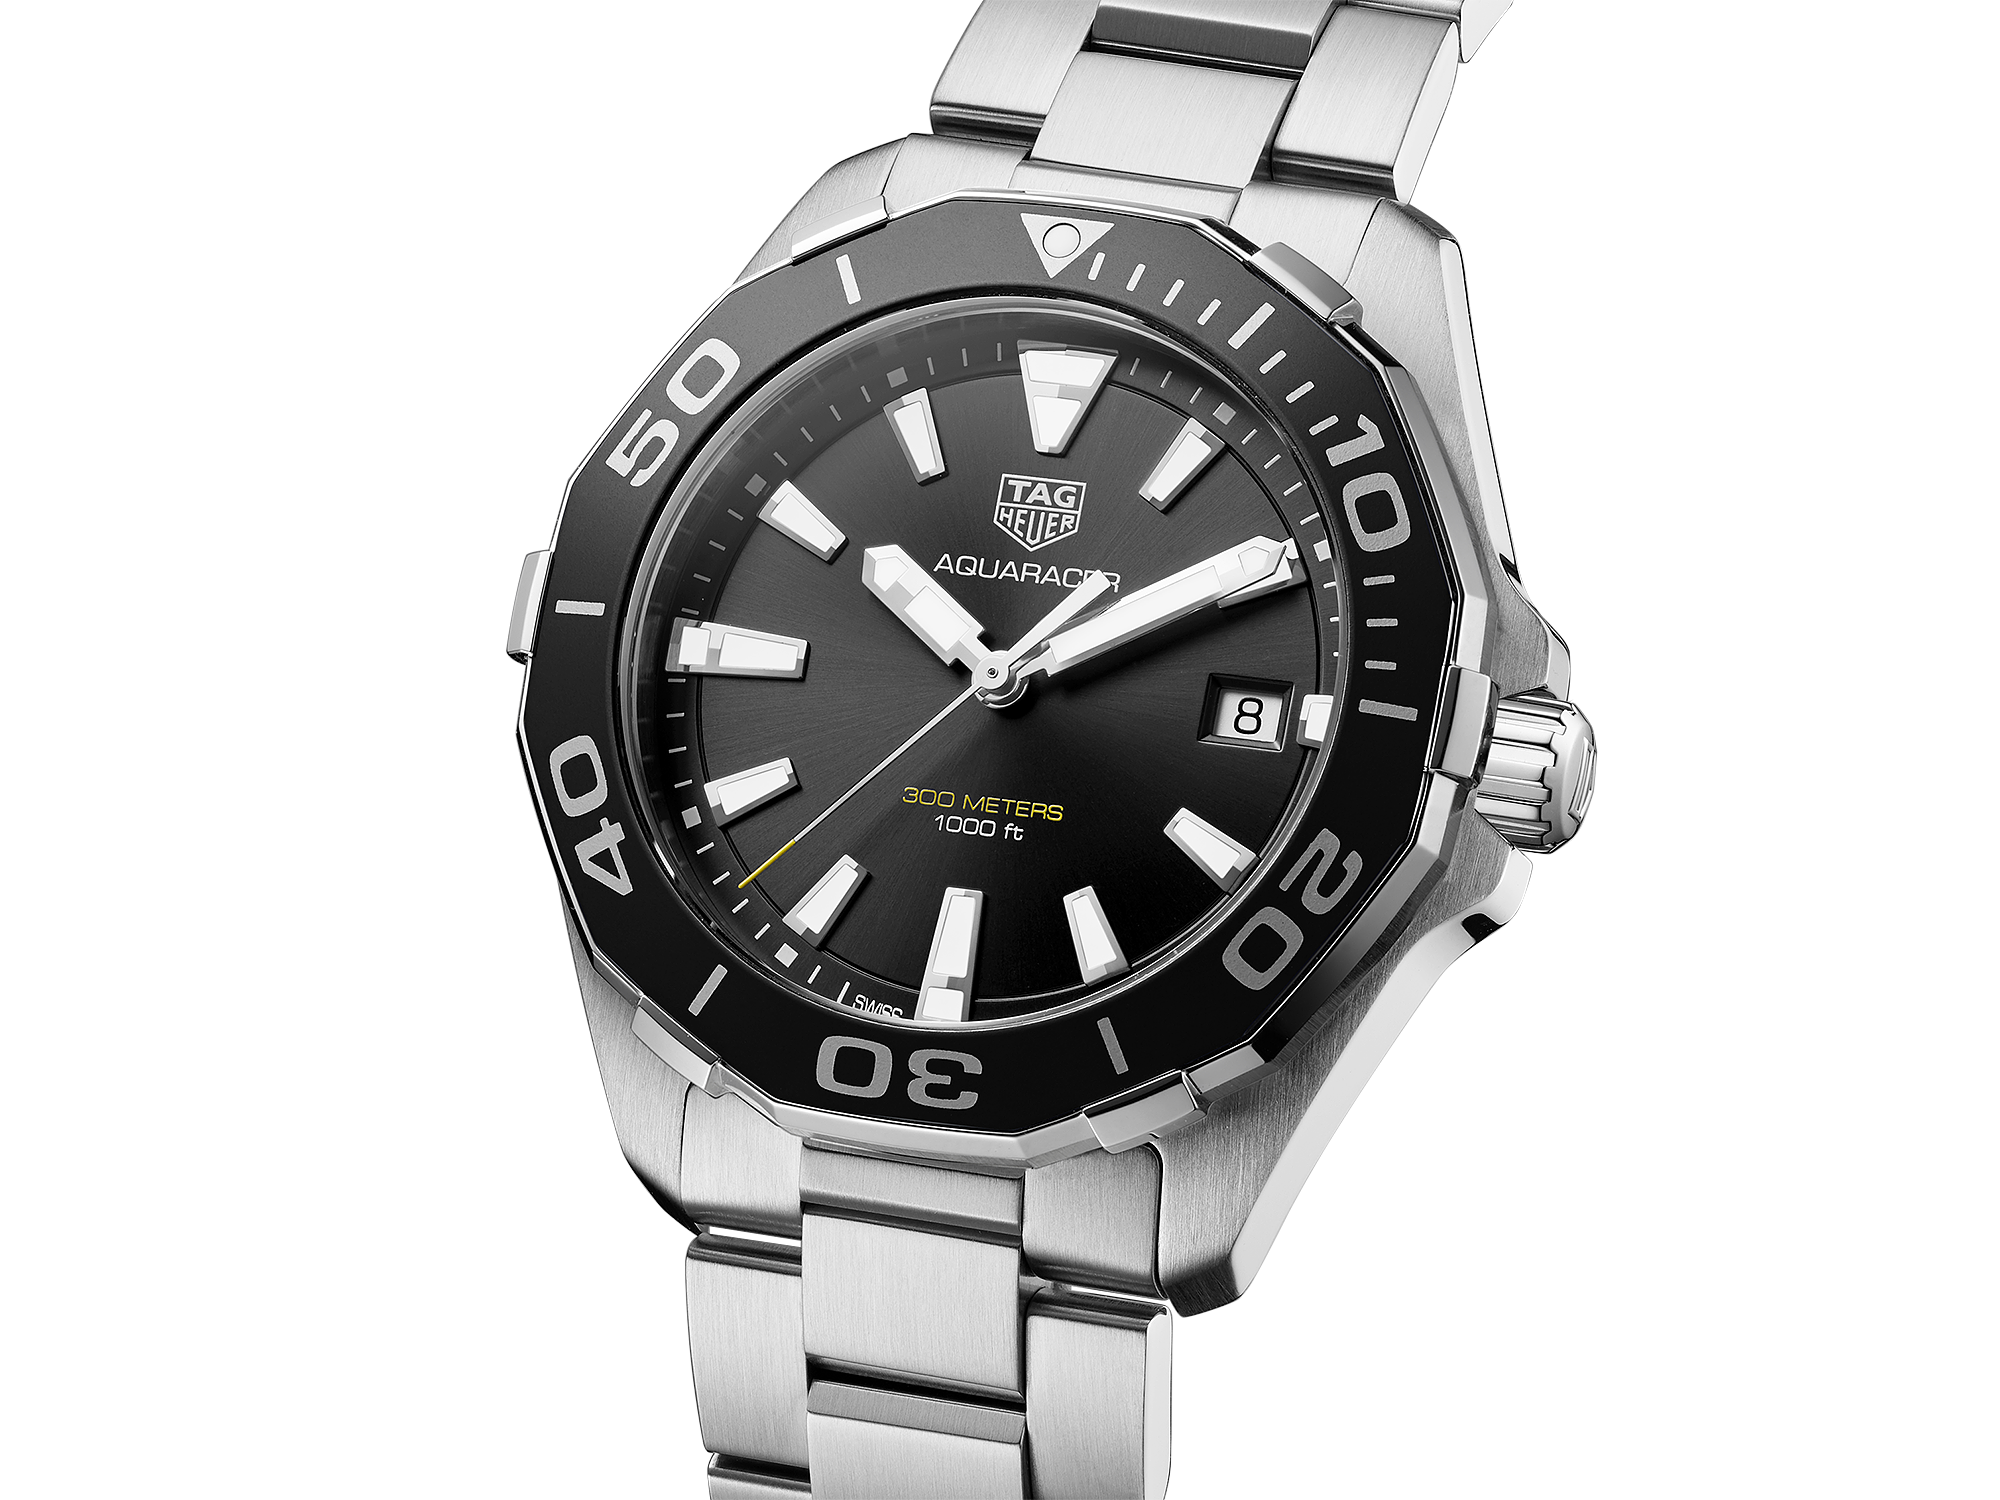 TAG Heuer TAG HEUER Tag Heuer Aquaracer Men's Automatic Watch Black Dial CAK2110 